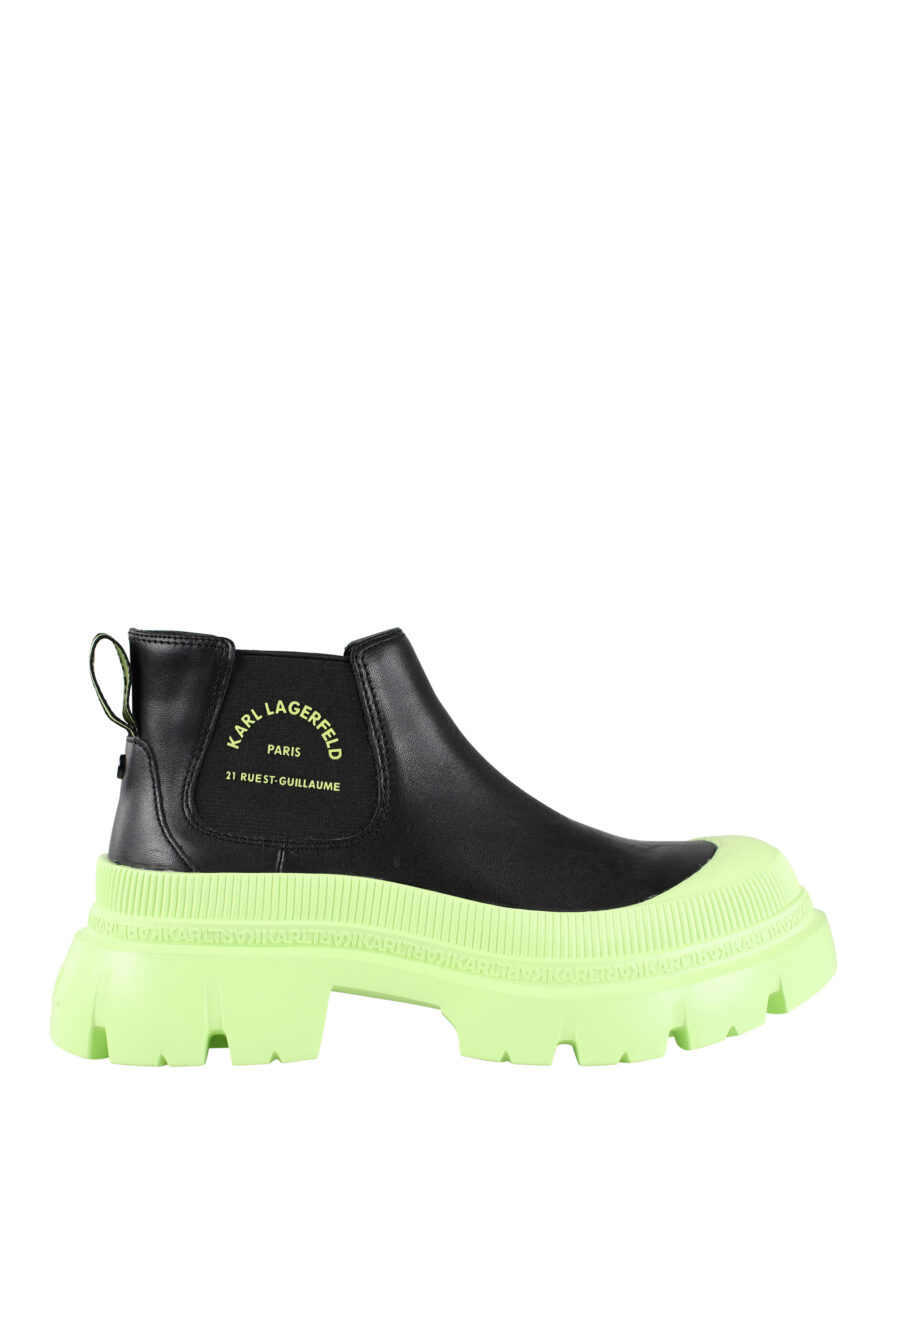 Black ankle boots with logo and lime green sole - IMG 9590